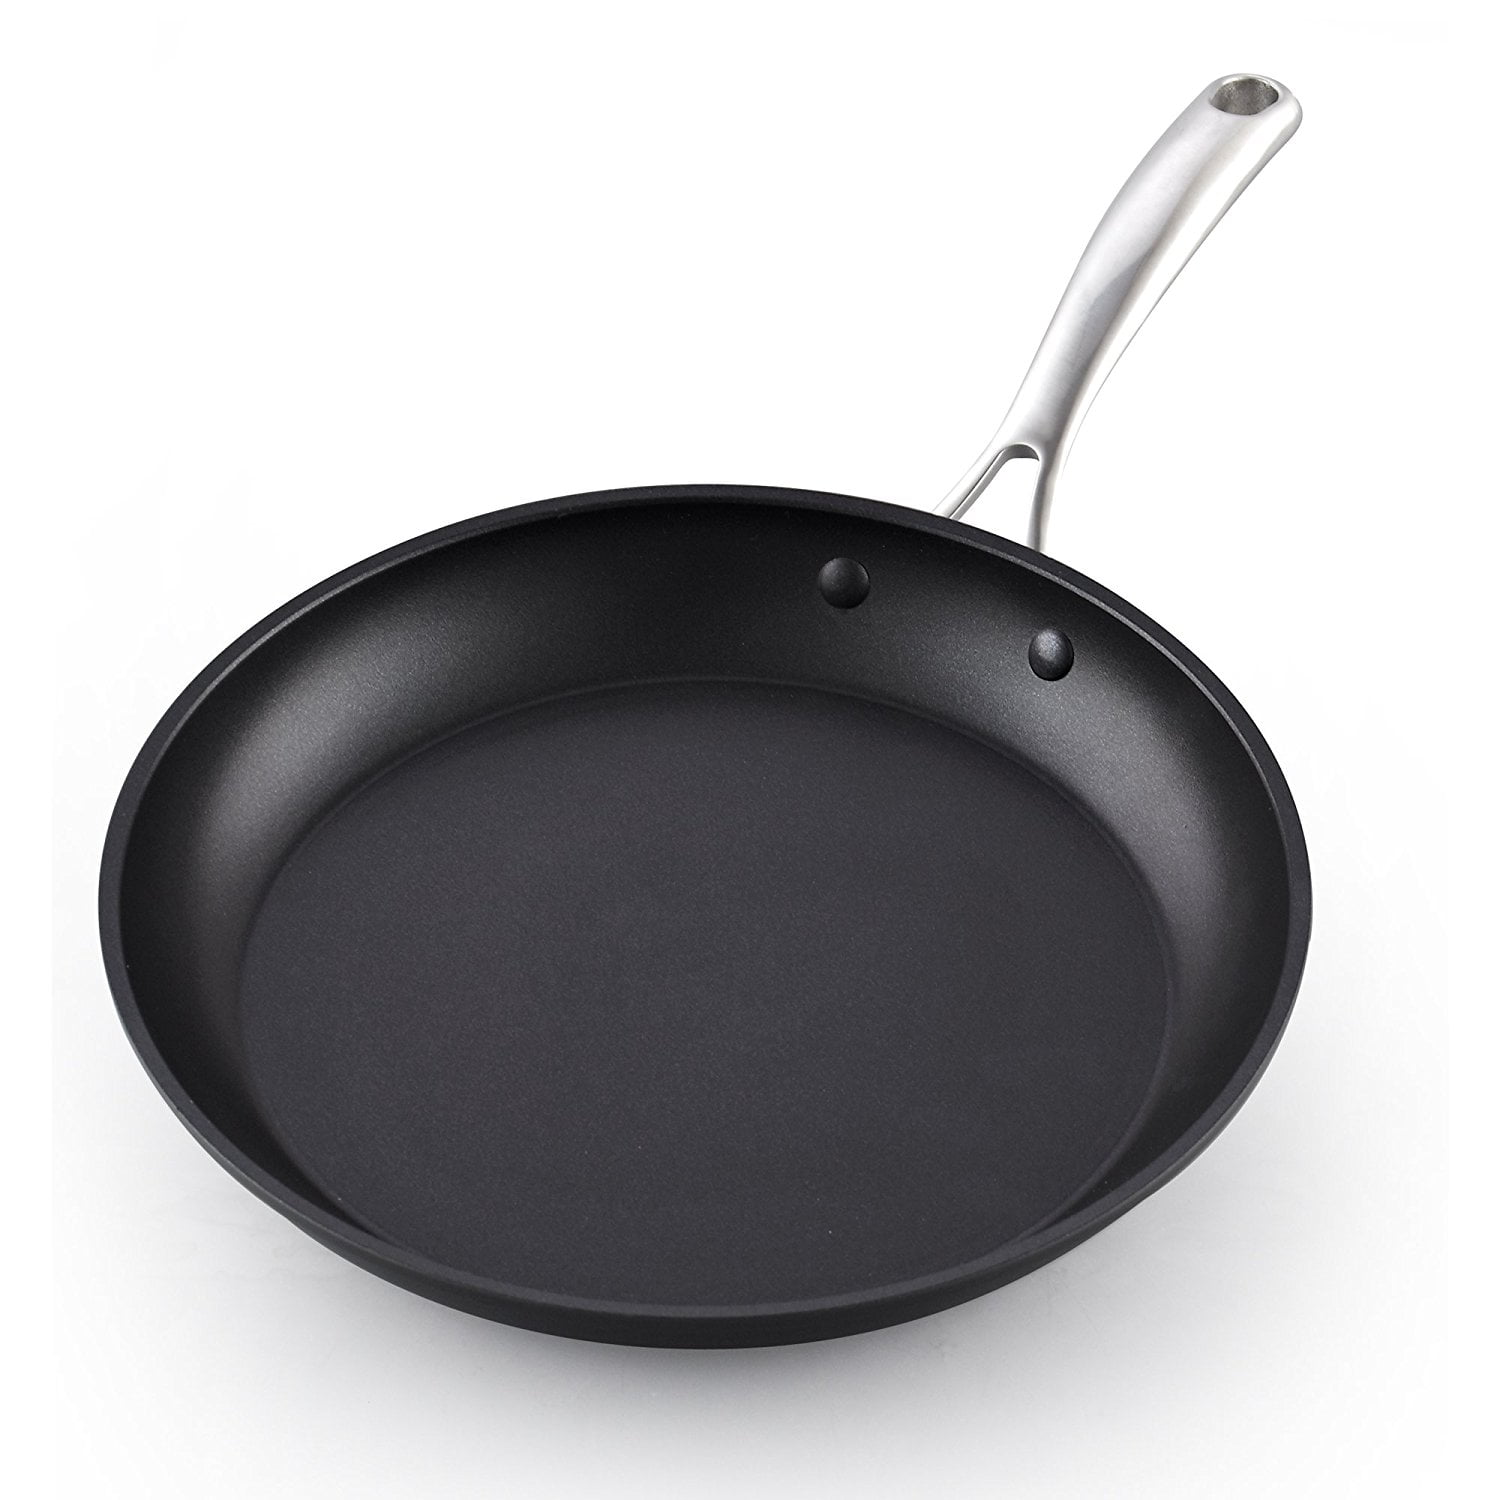 Vinchef Nonstick Deep Frying Pan Saute Pan with Lid, 10in/3Qt Skillet Pan,  German 3C+ Ceramic Coating Technology, Aluminum Casting, Induction